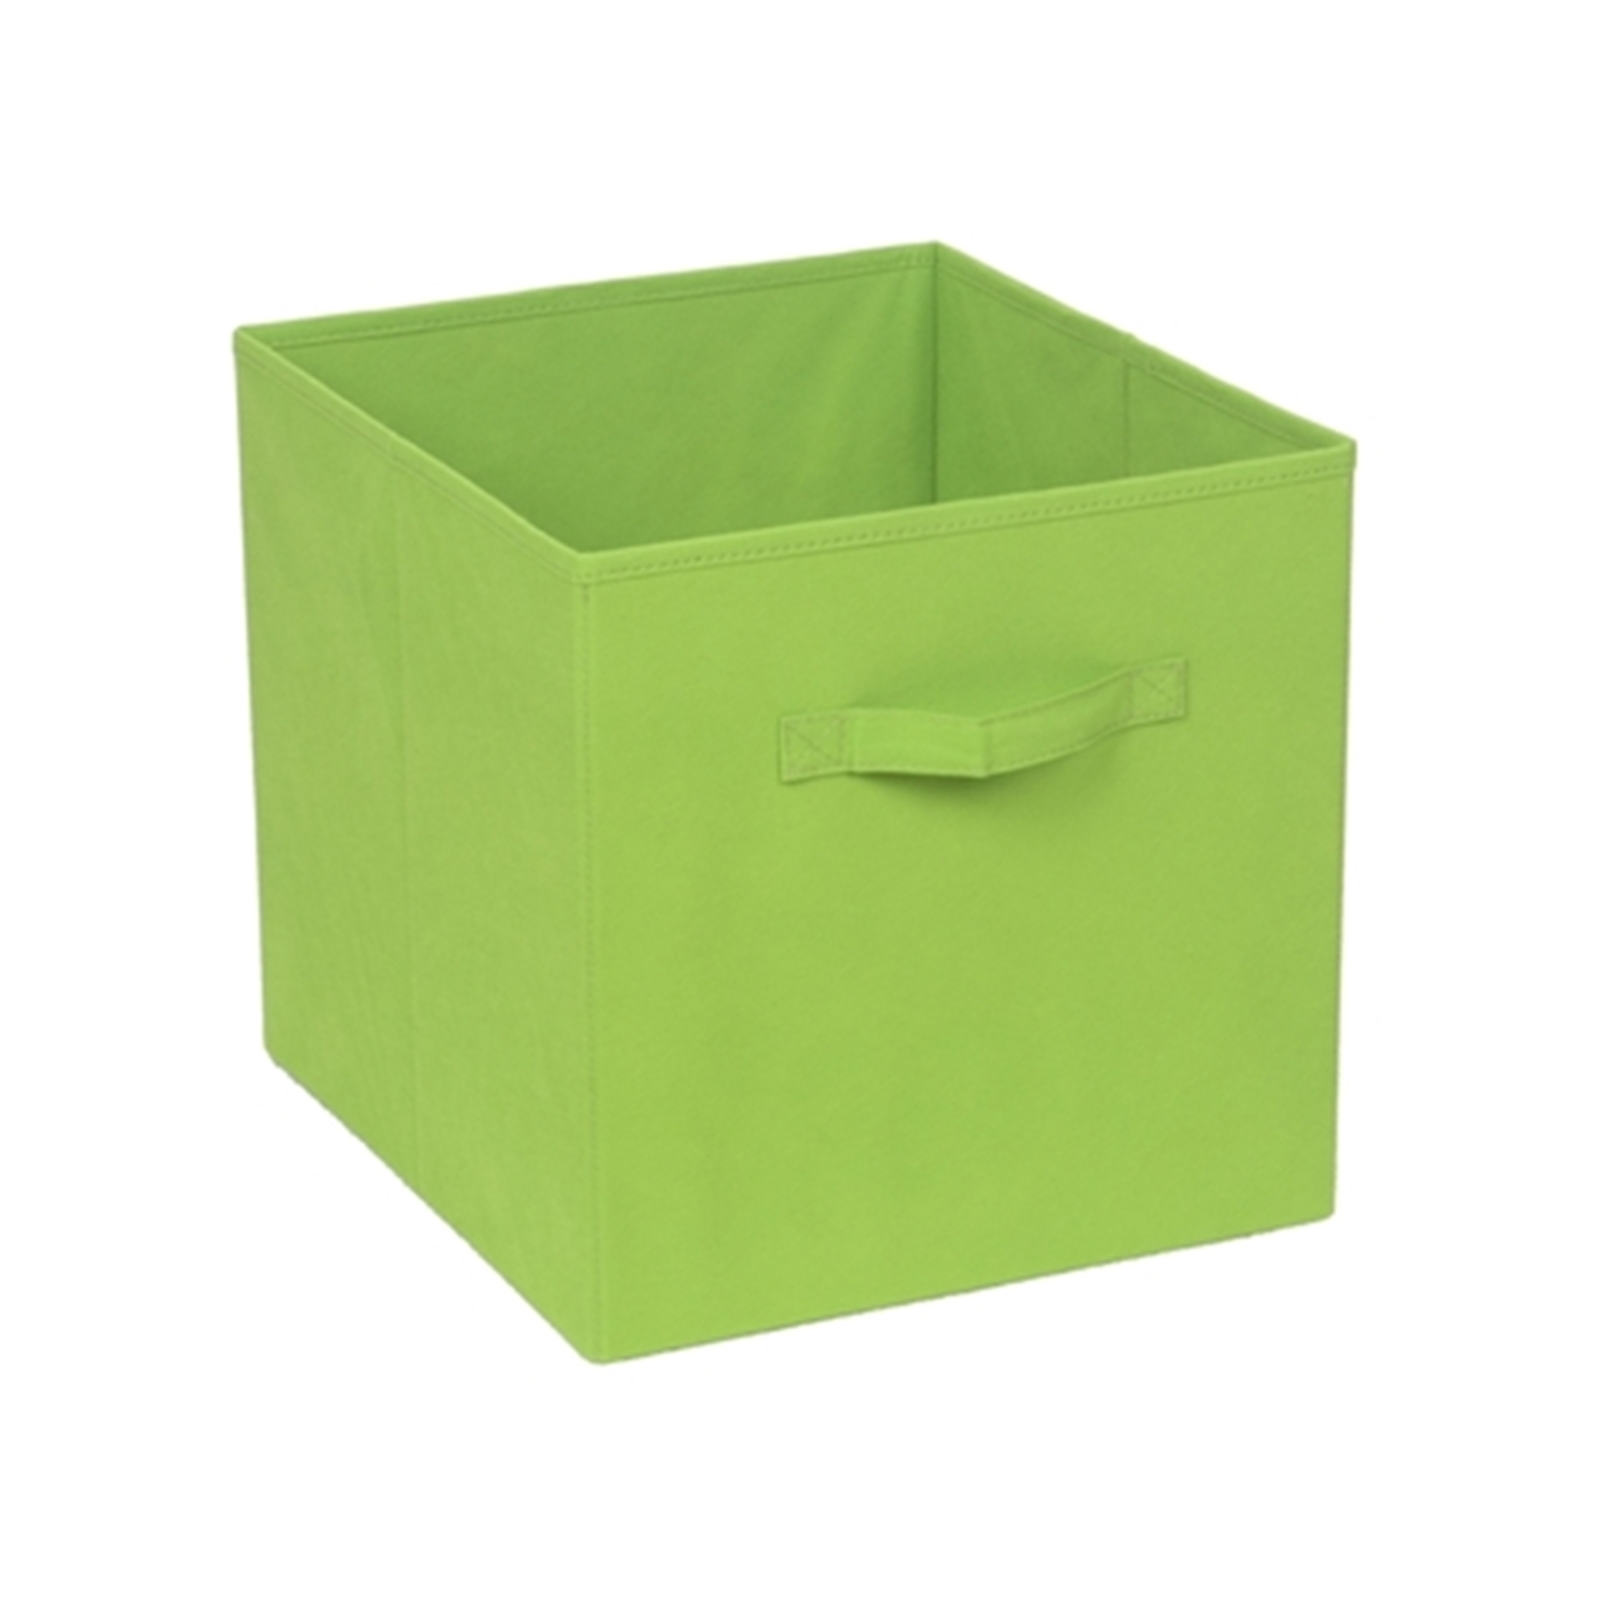 Clever Cube 330 x 330 x 370mm Green Fabric Insert